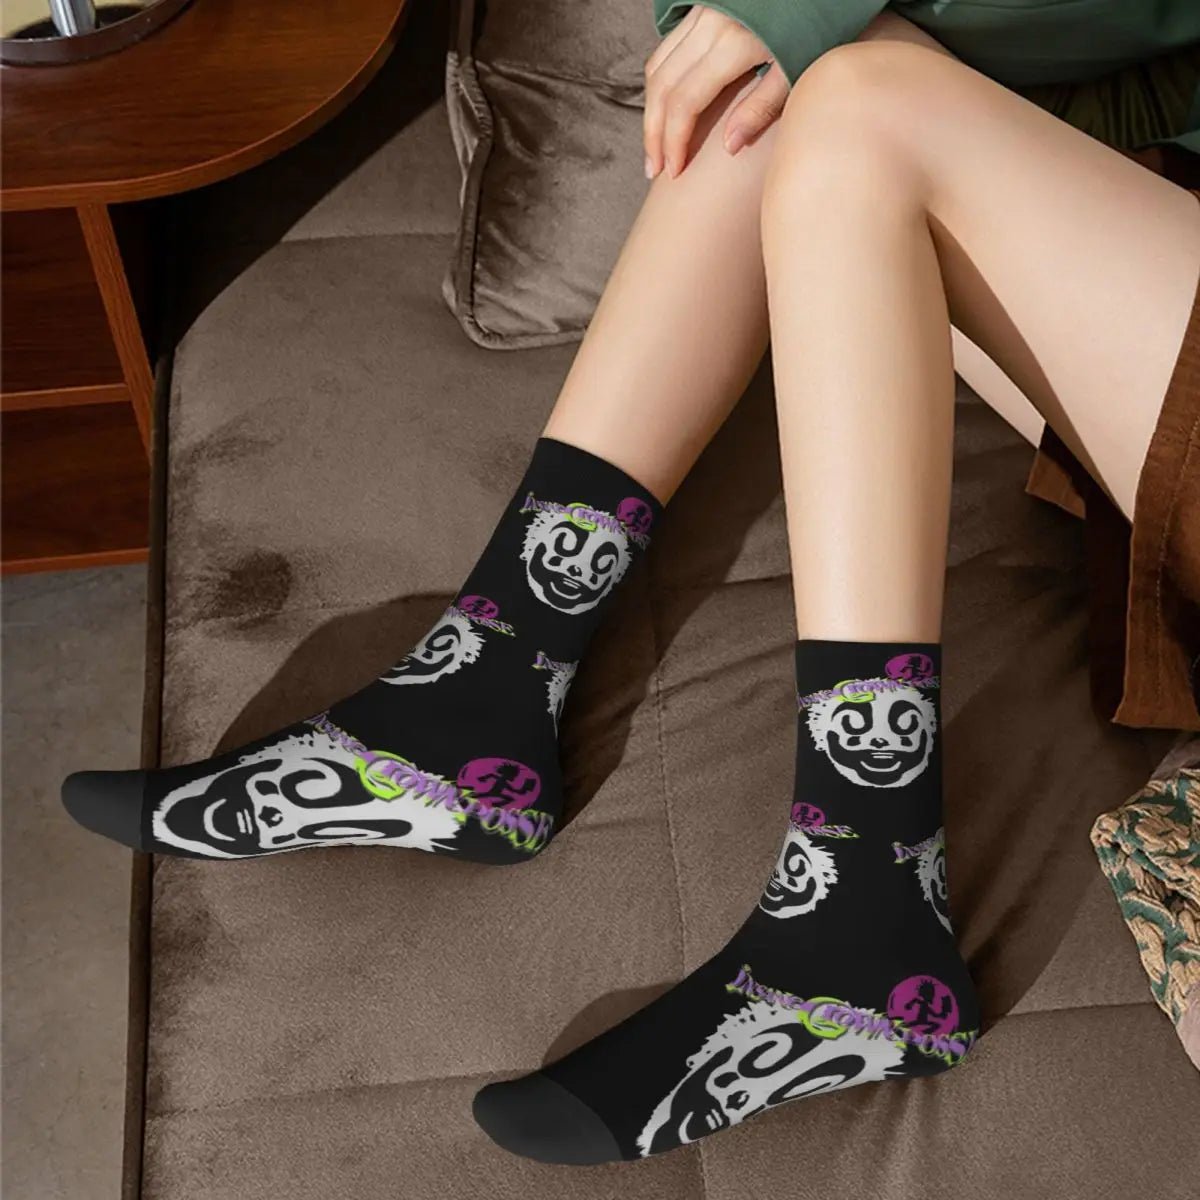 Juggalo Socks - The Rave Cave